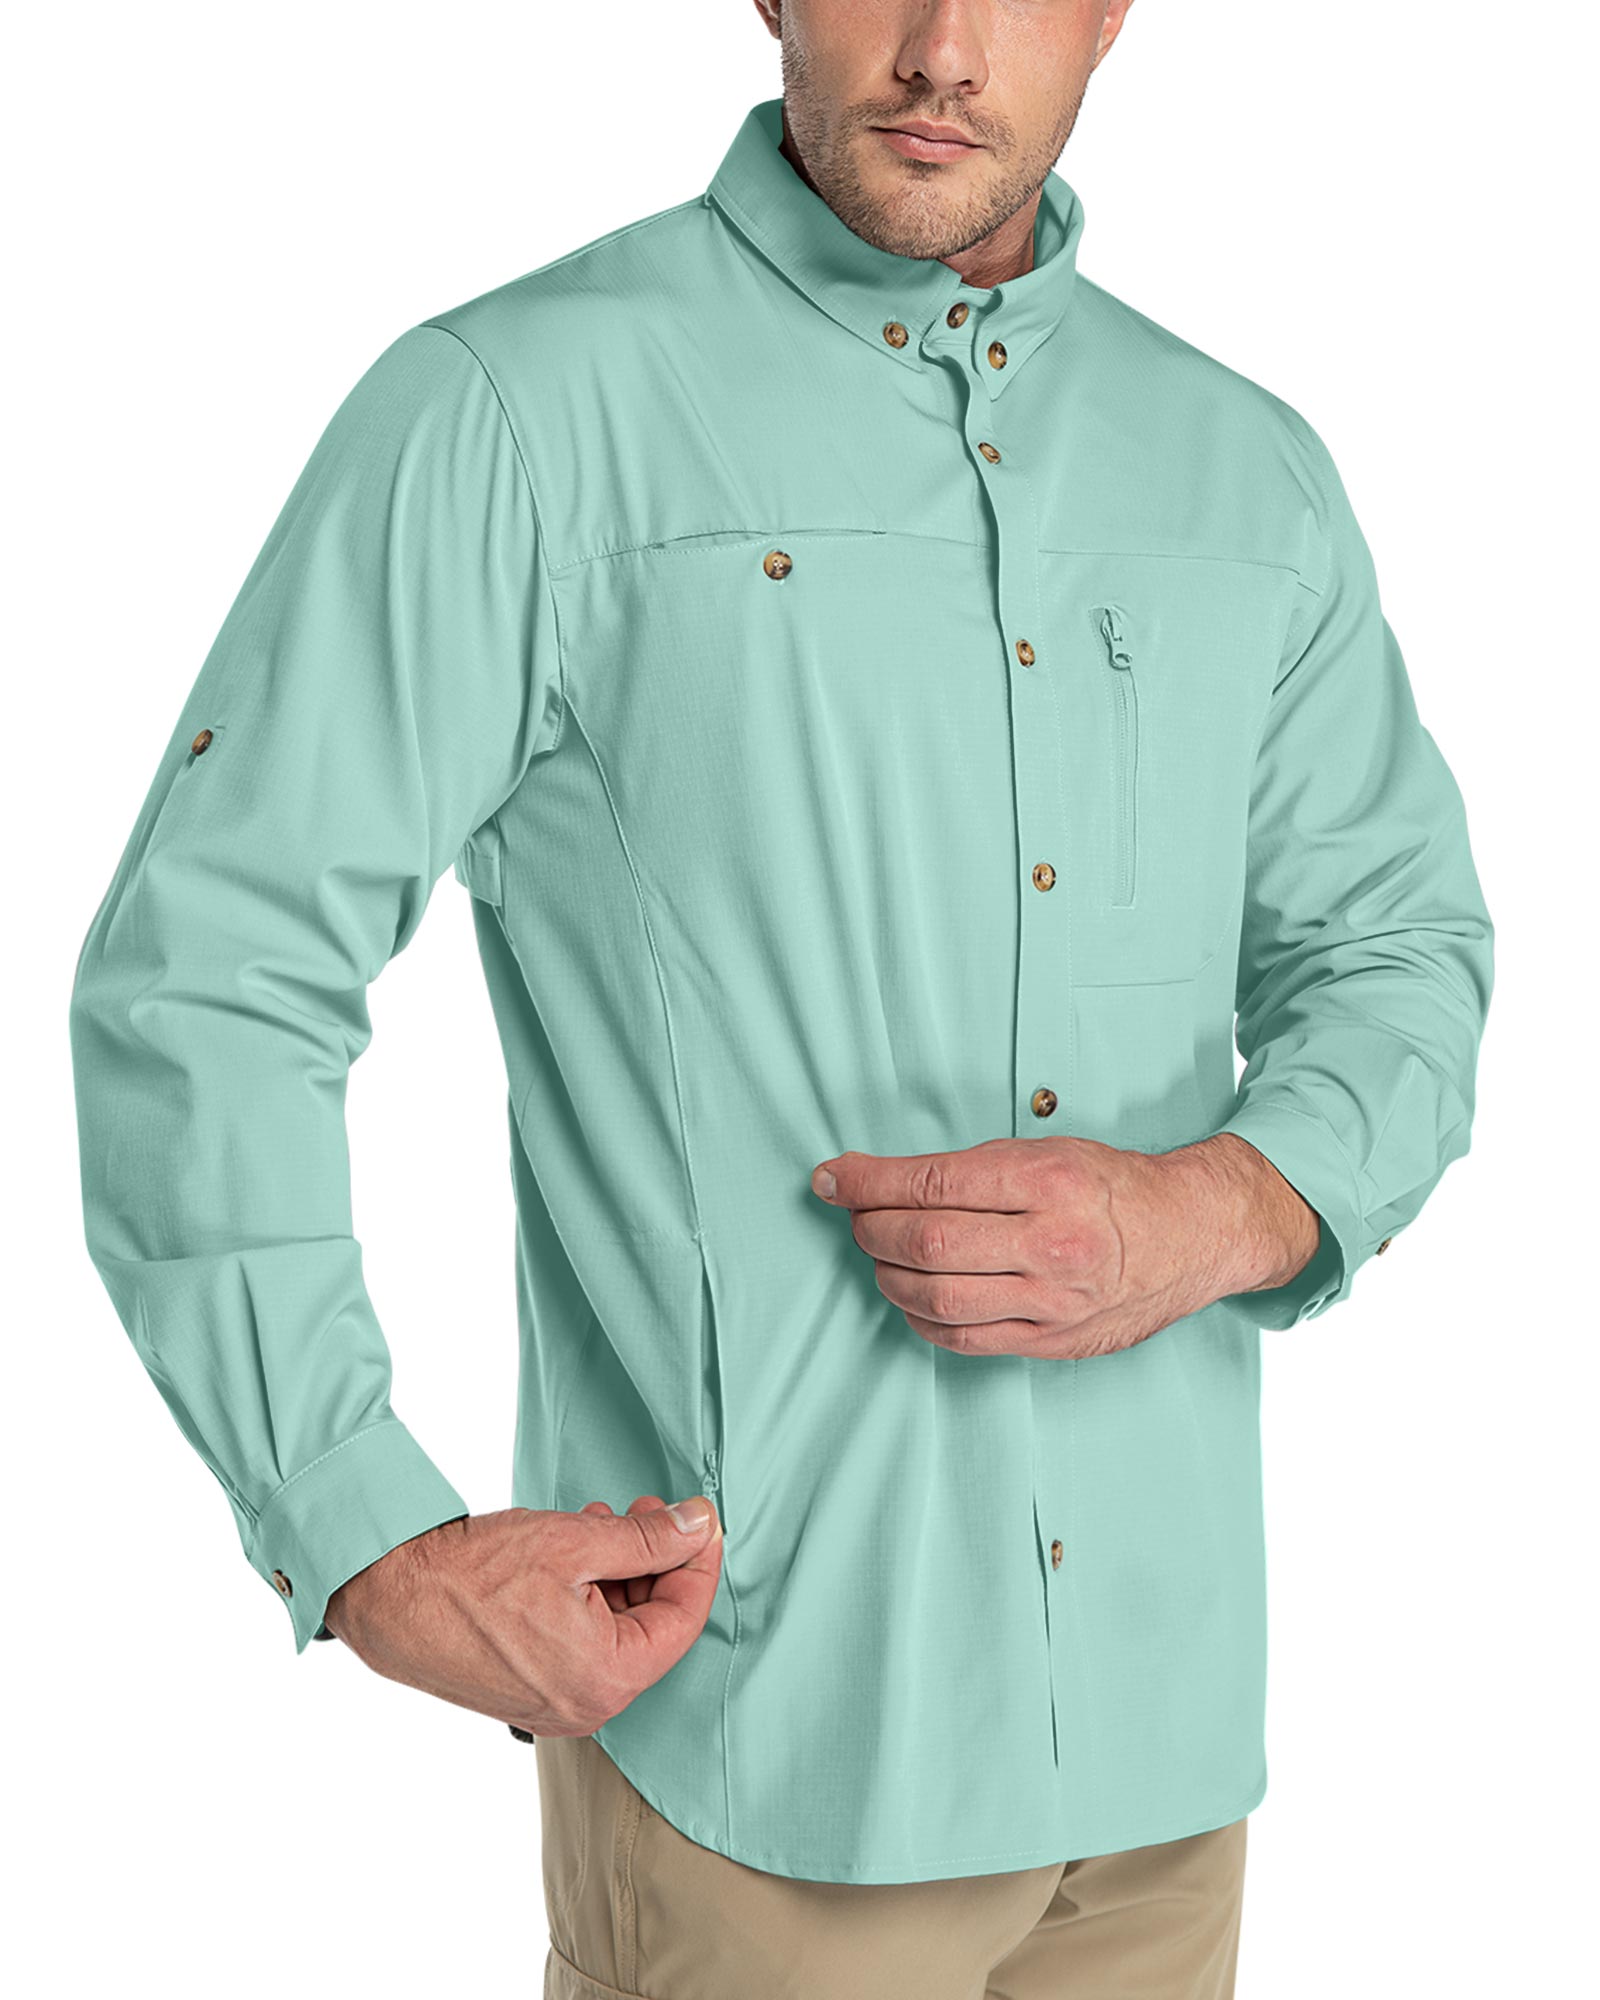  Men's Sun Protection Fishing Shirts Long Sleeve Travel Work  Shirts for Men UPF50+ Button Down Shirts with Zipper Pockets(Arona Small) :  Clothing, Shoes & Jewelry